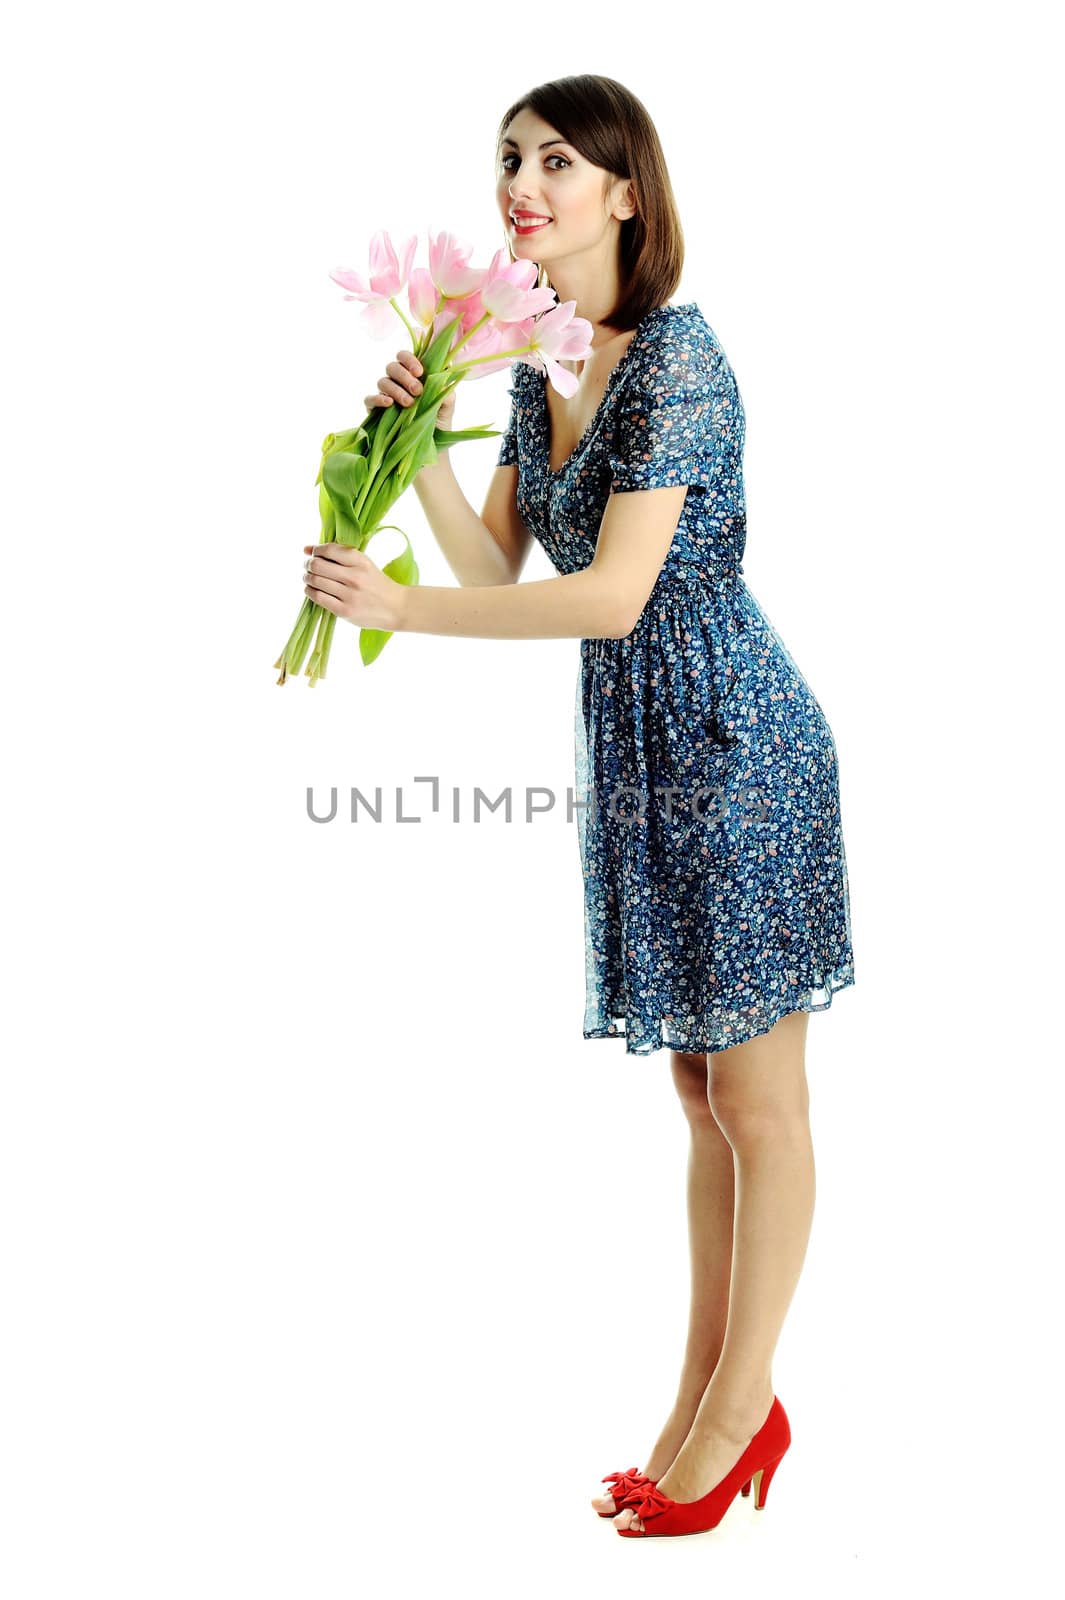 An image of a young pretty woman with pink flowers